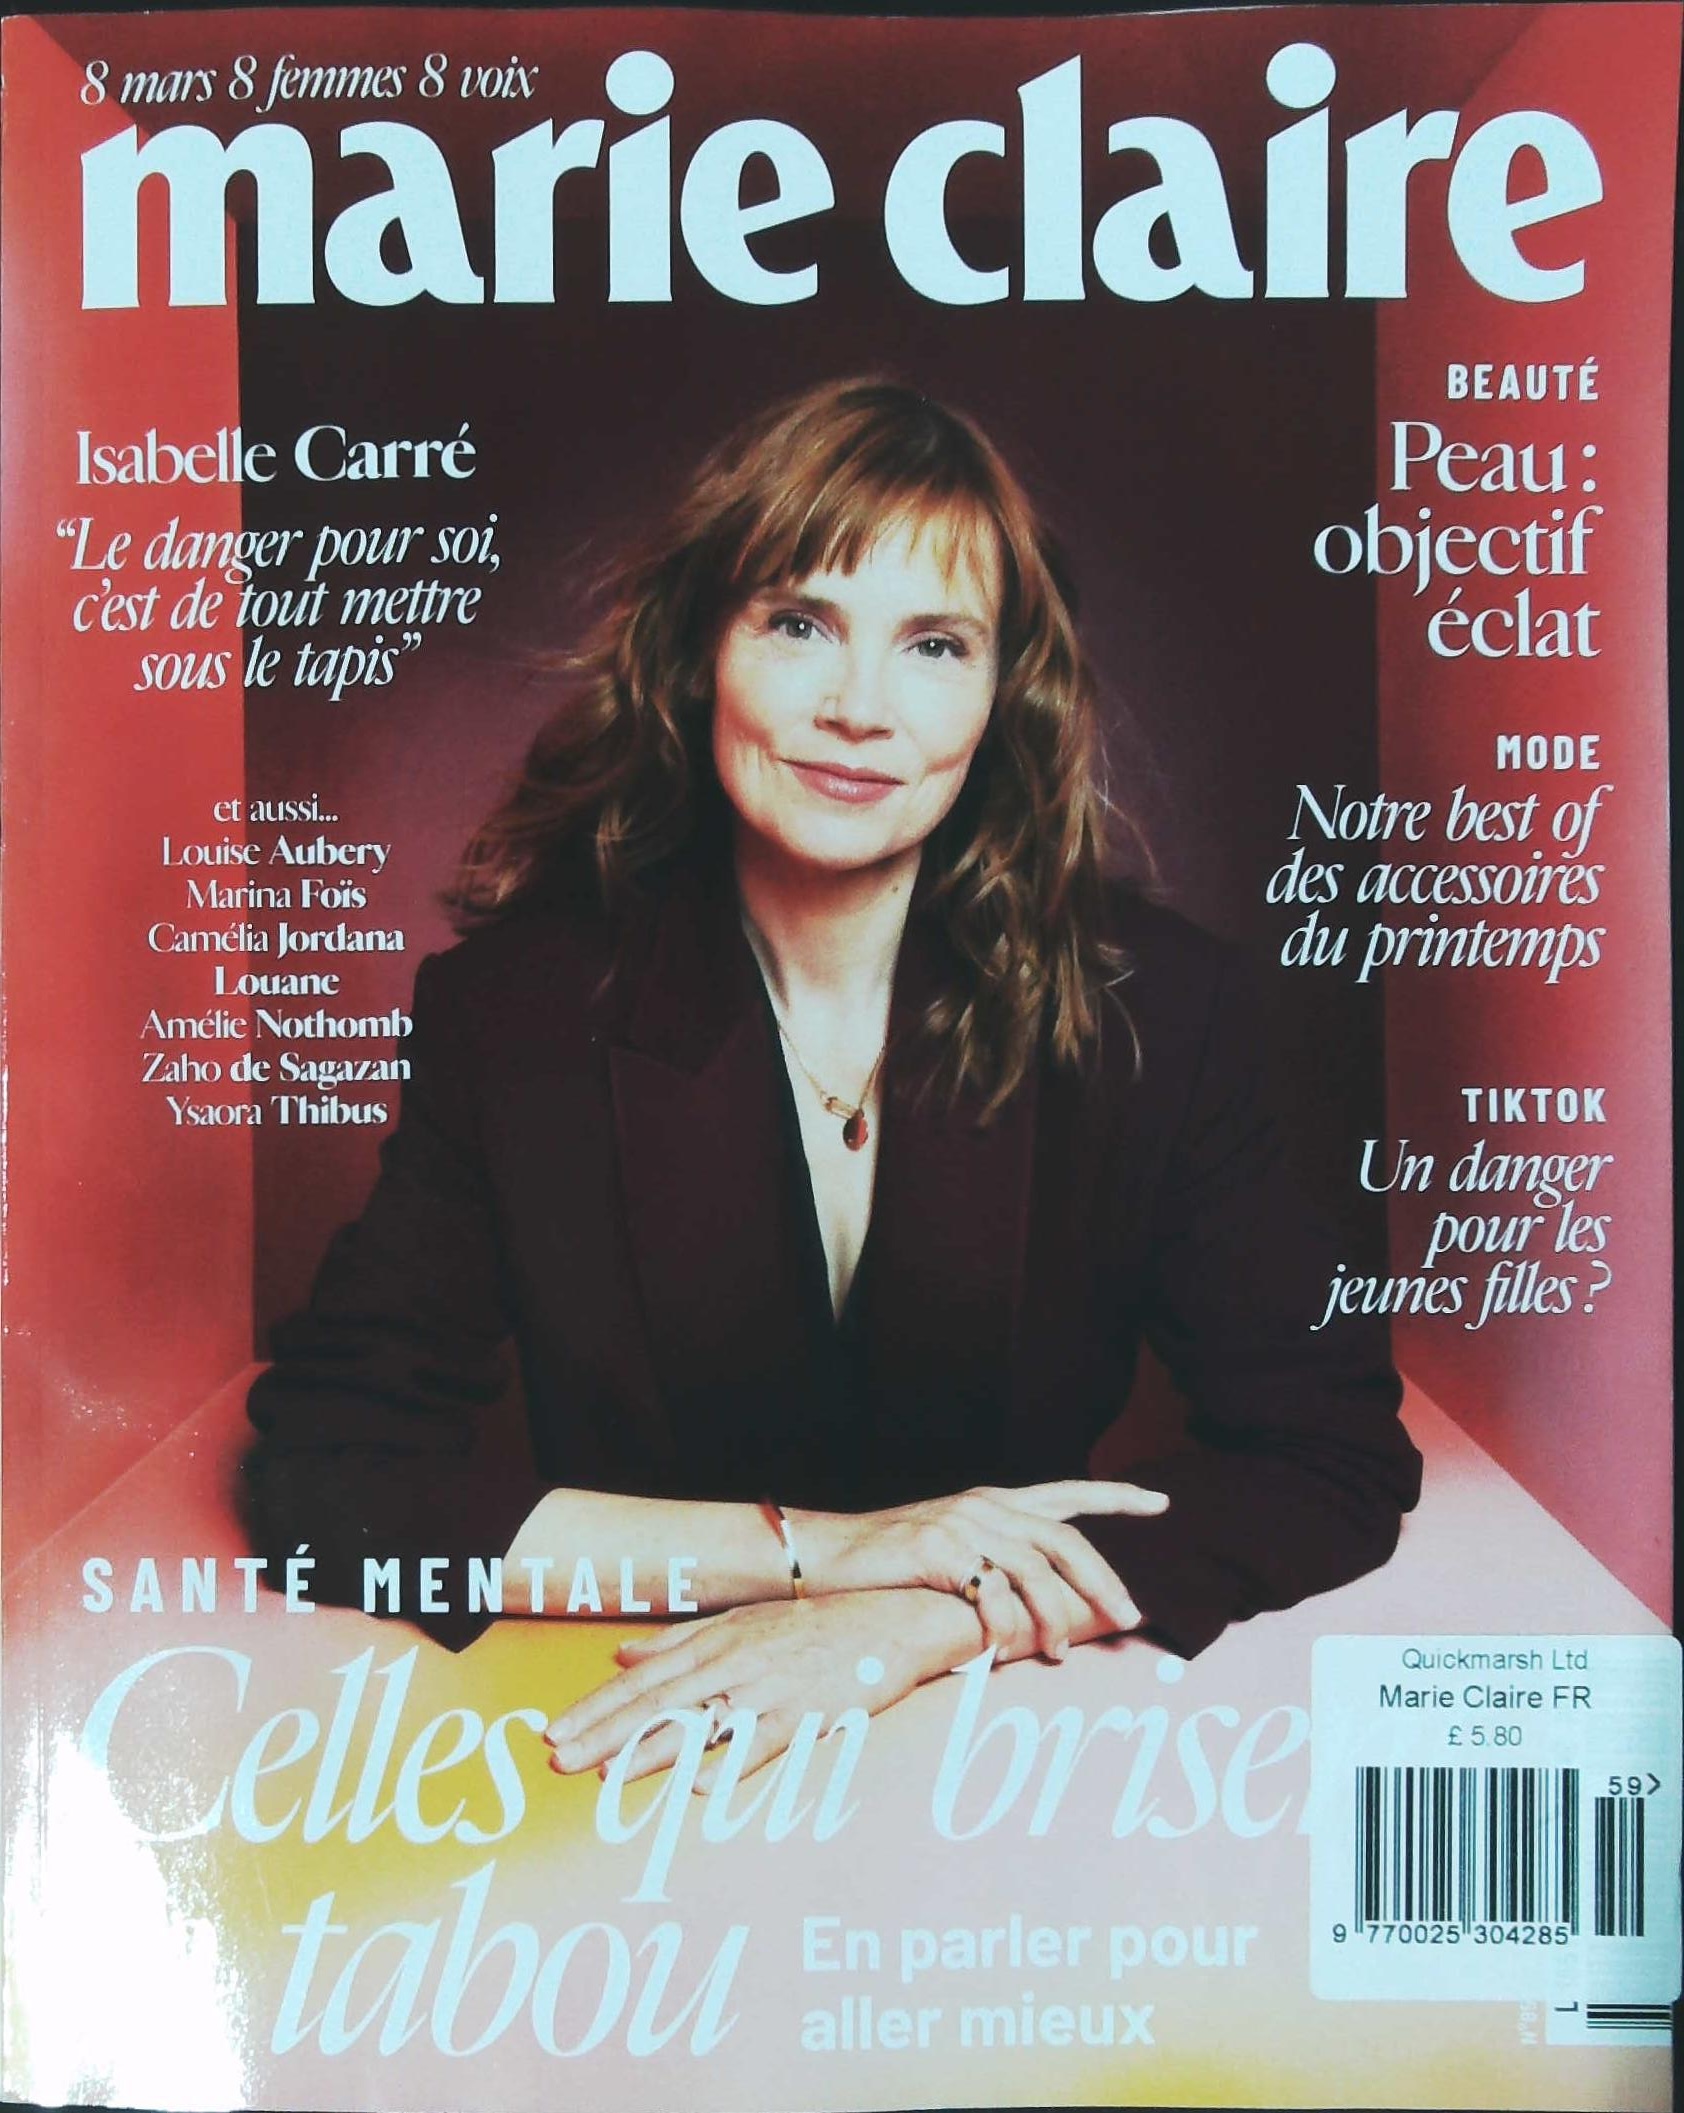 MARIE CLAIRE (FRA)